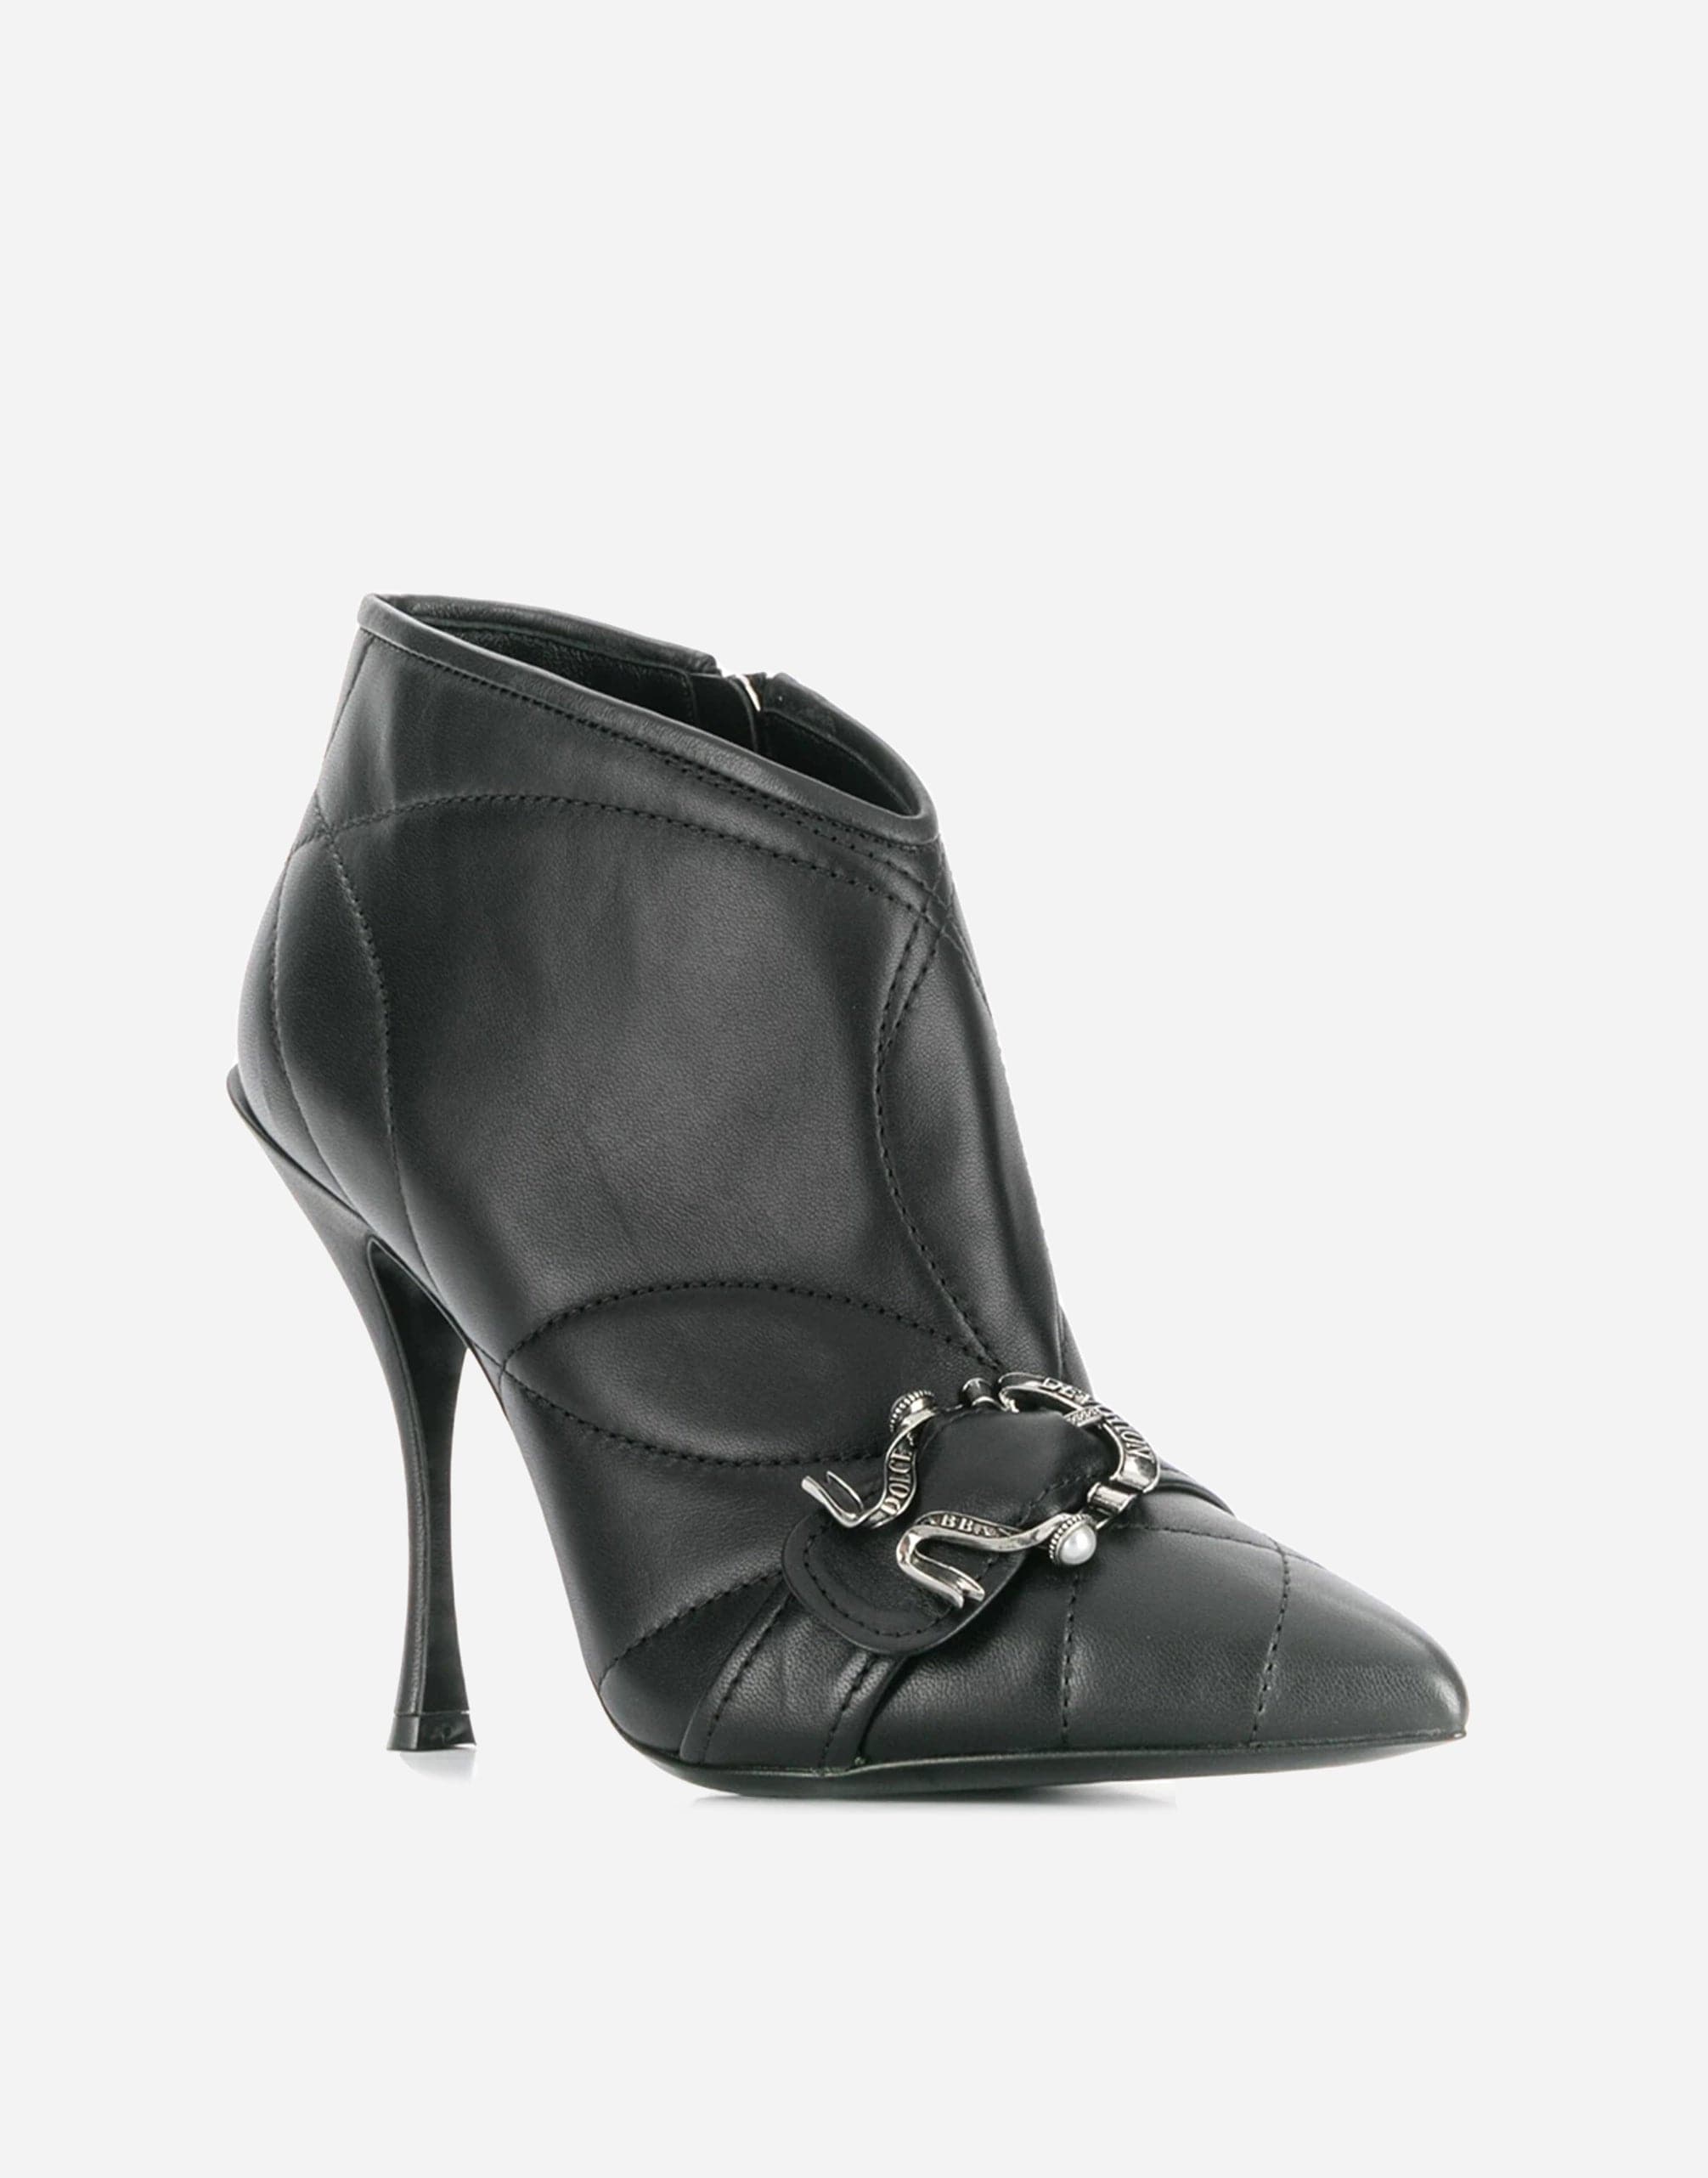 Dolce & Gabbana Devotion Quilted Buckled Booties